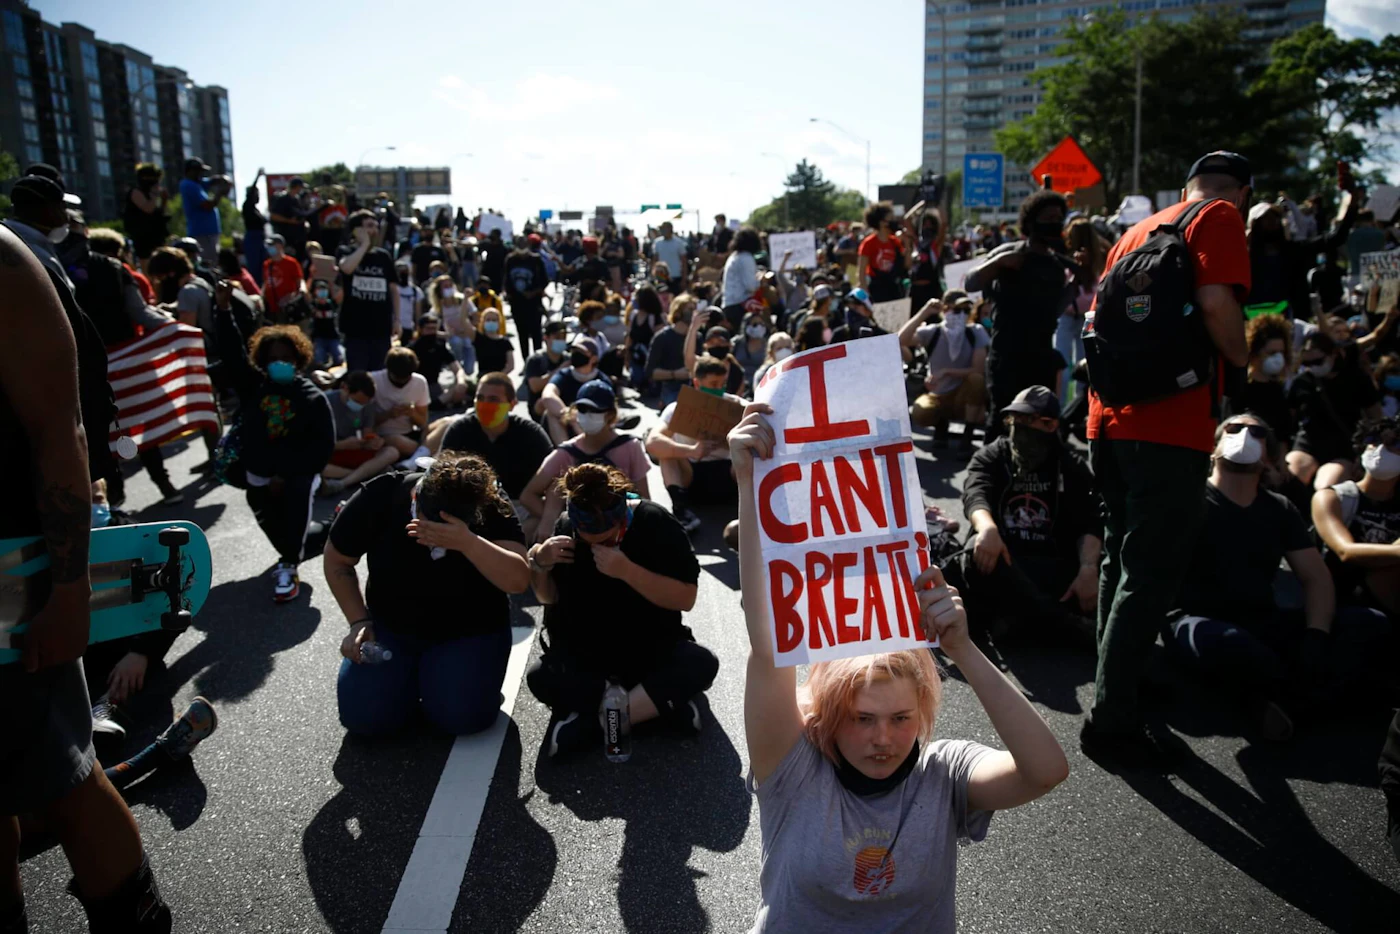 Protesters gather on Interstate 676 in Philadelphia, Monday, June 1, 2020 in the aftermath of protest and unrest in reaction to the death of George Floyd. Floyd died after being restrained by Minneapolis police officers on May 25. (AP Photo/Matt Rourke)